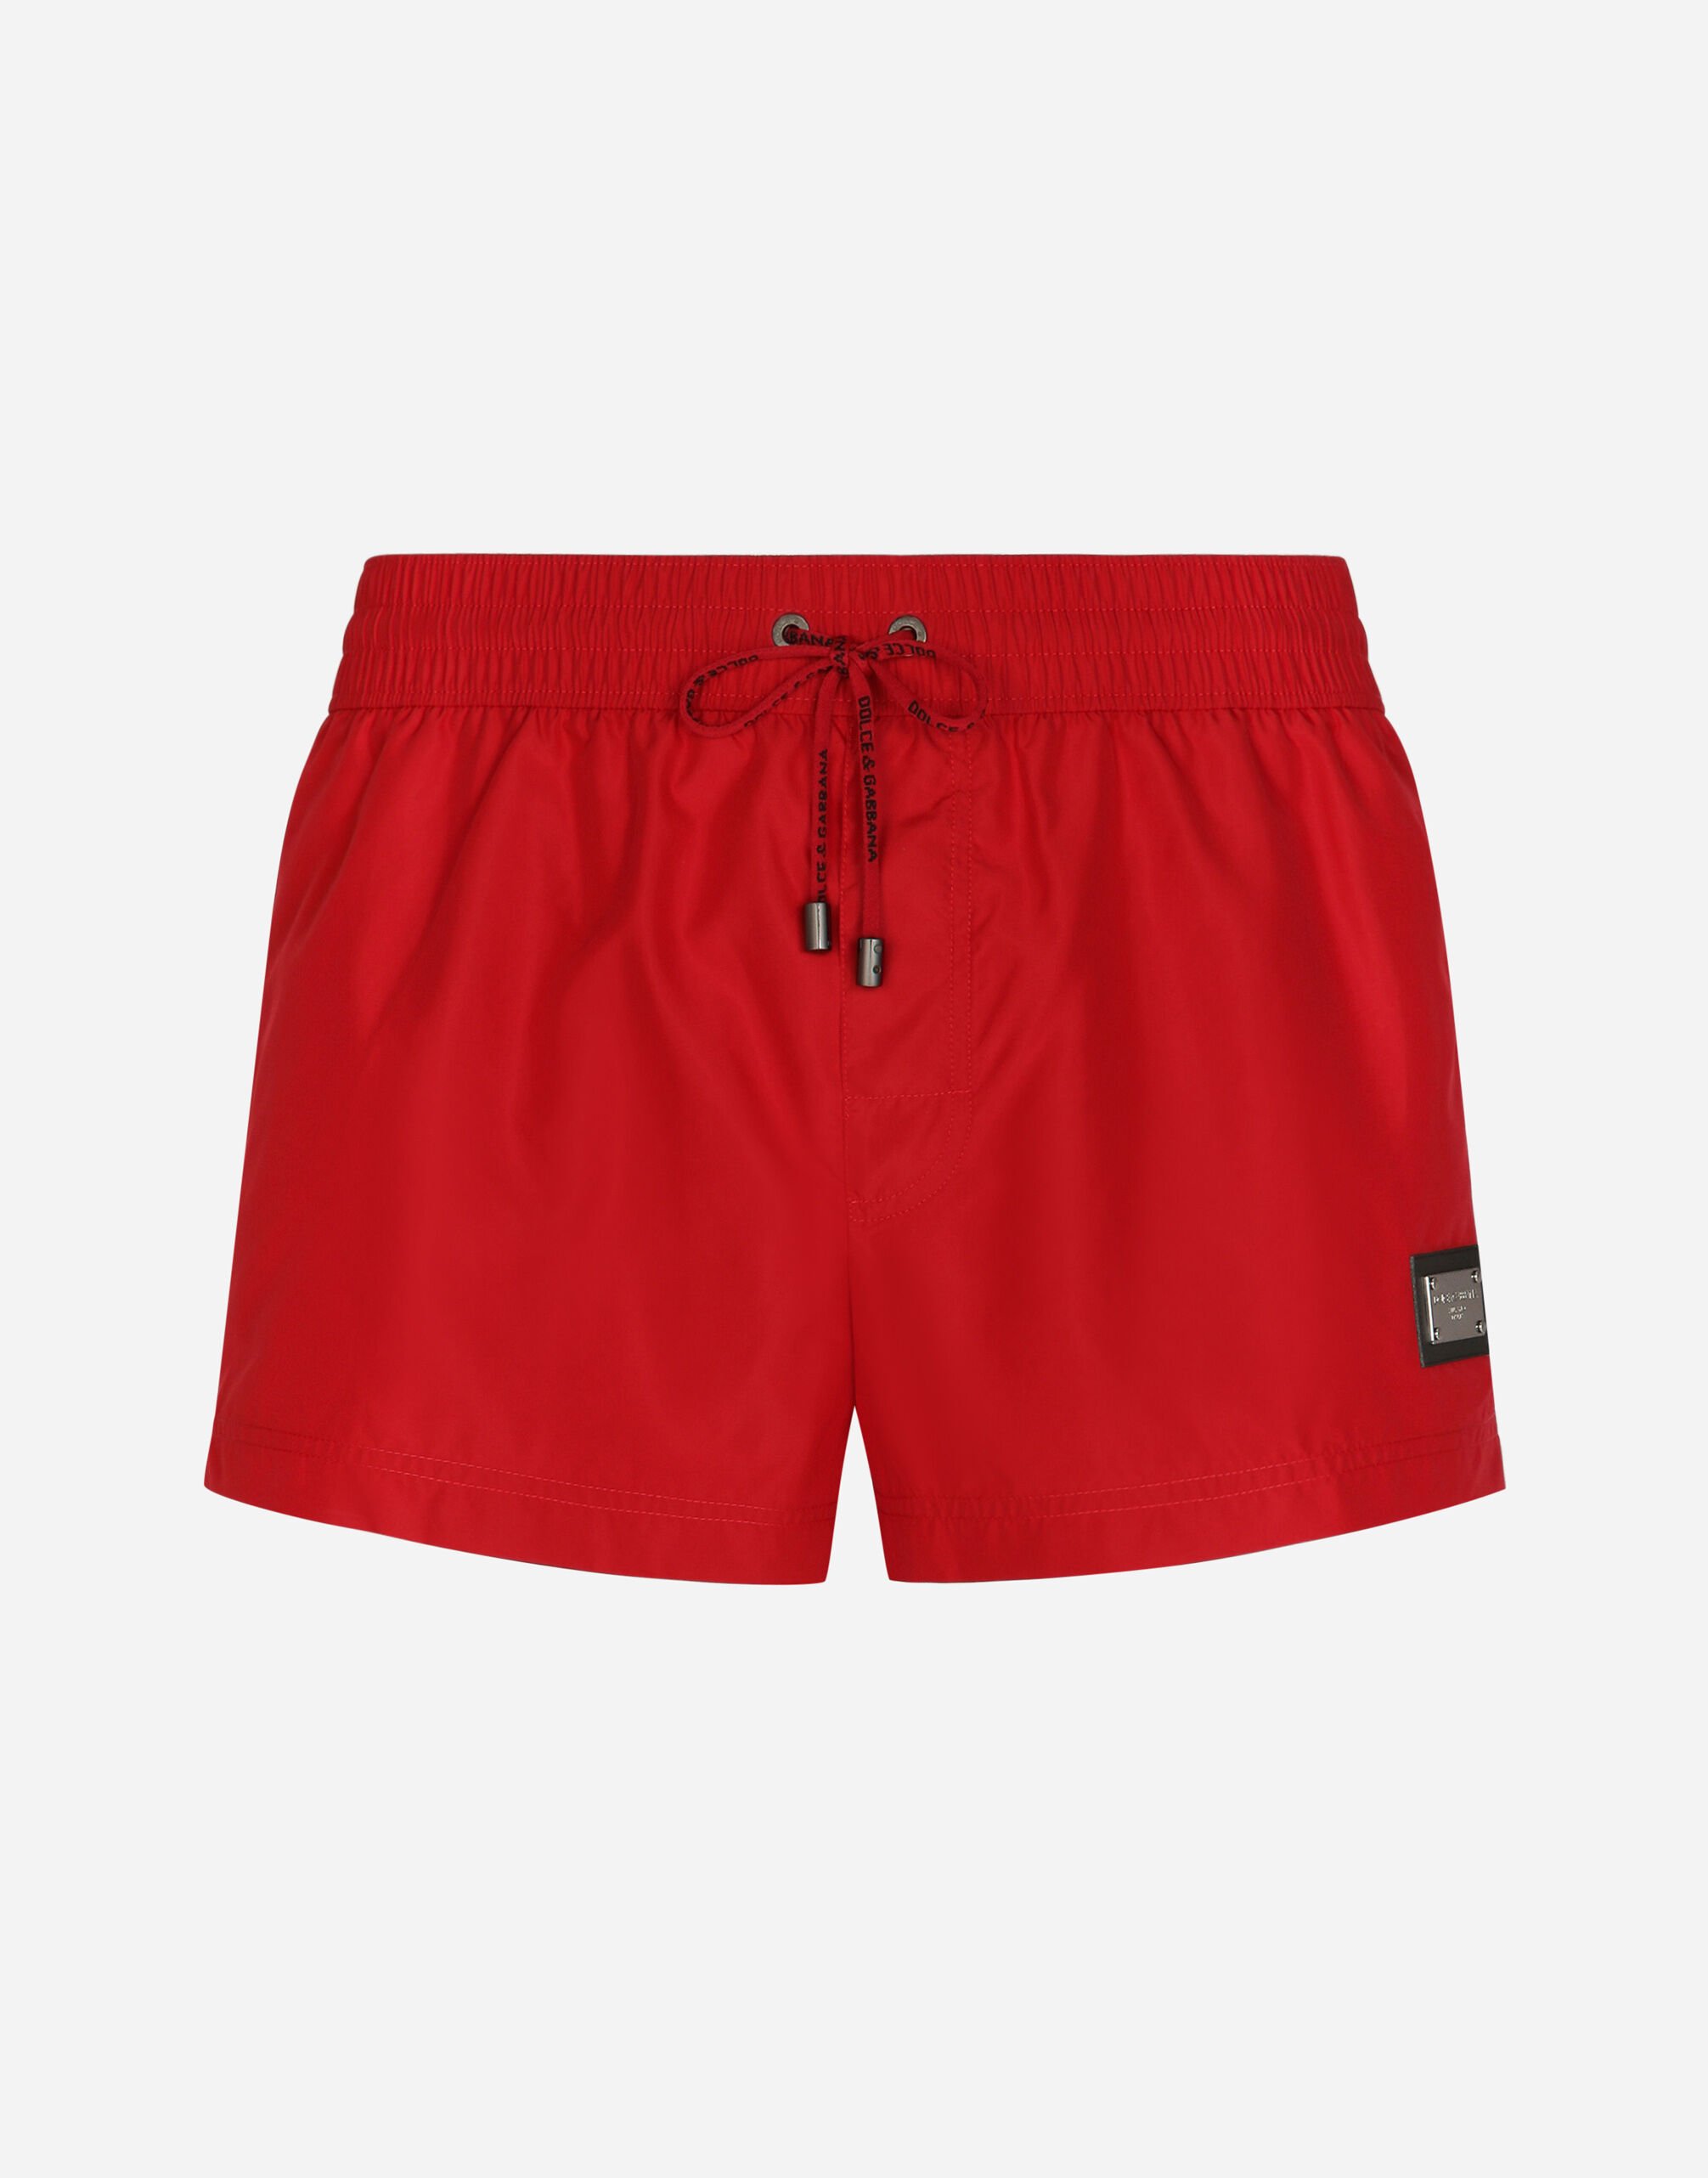 Dolce & Gabbana Short swim trunks with branded tag Print M4A13TISMF5